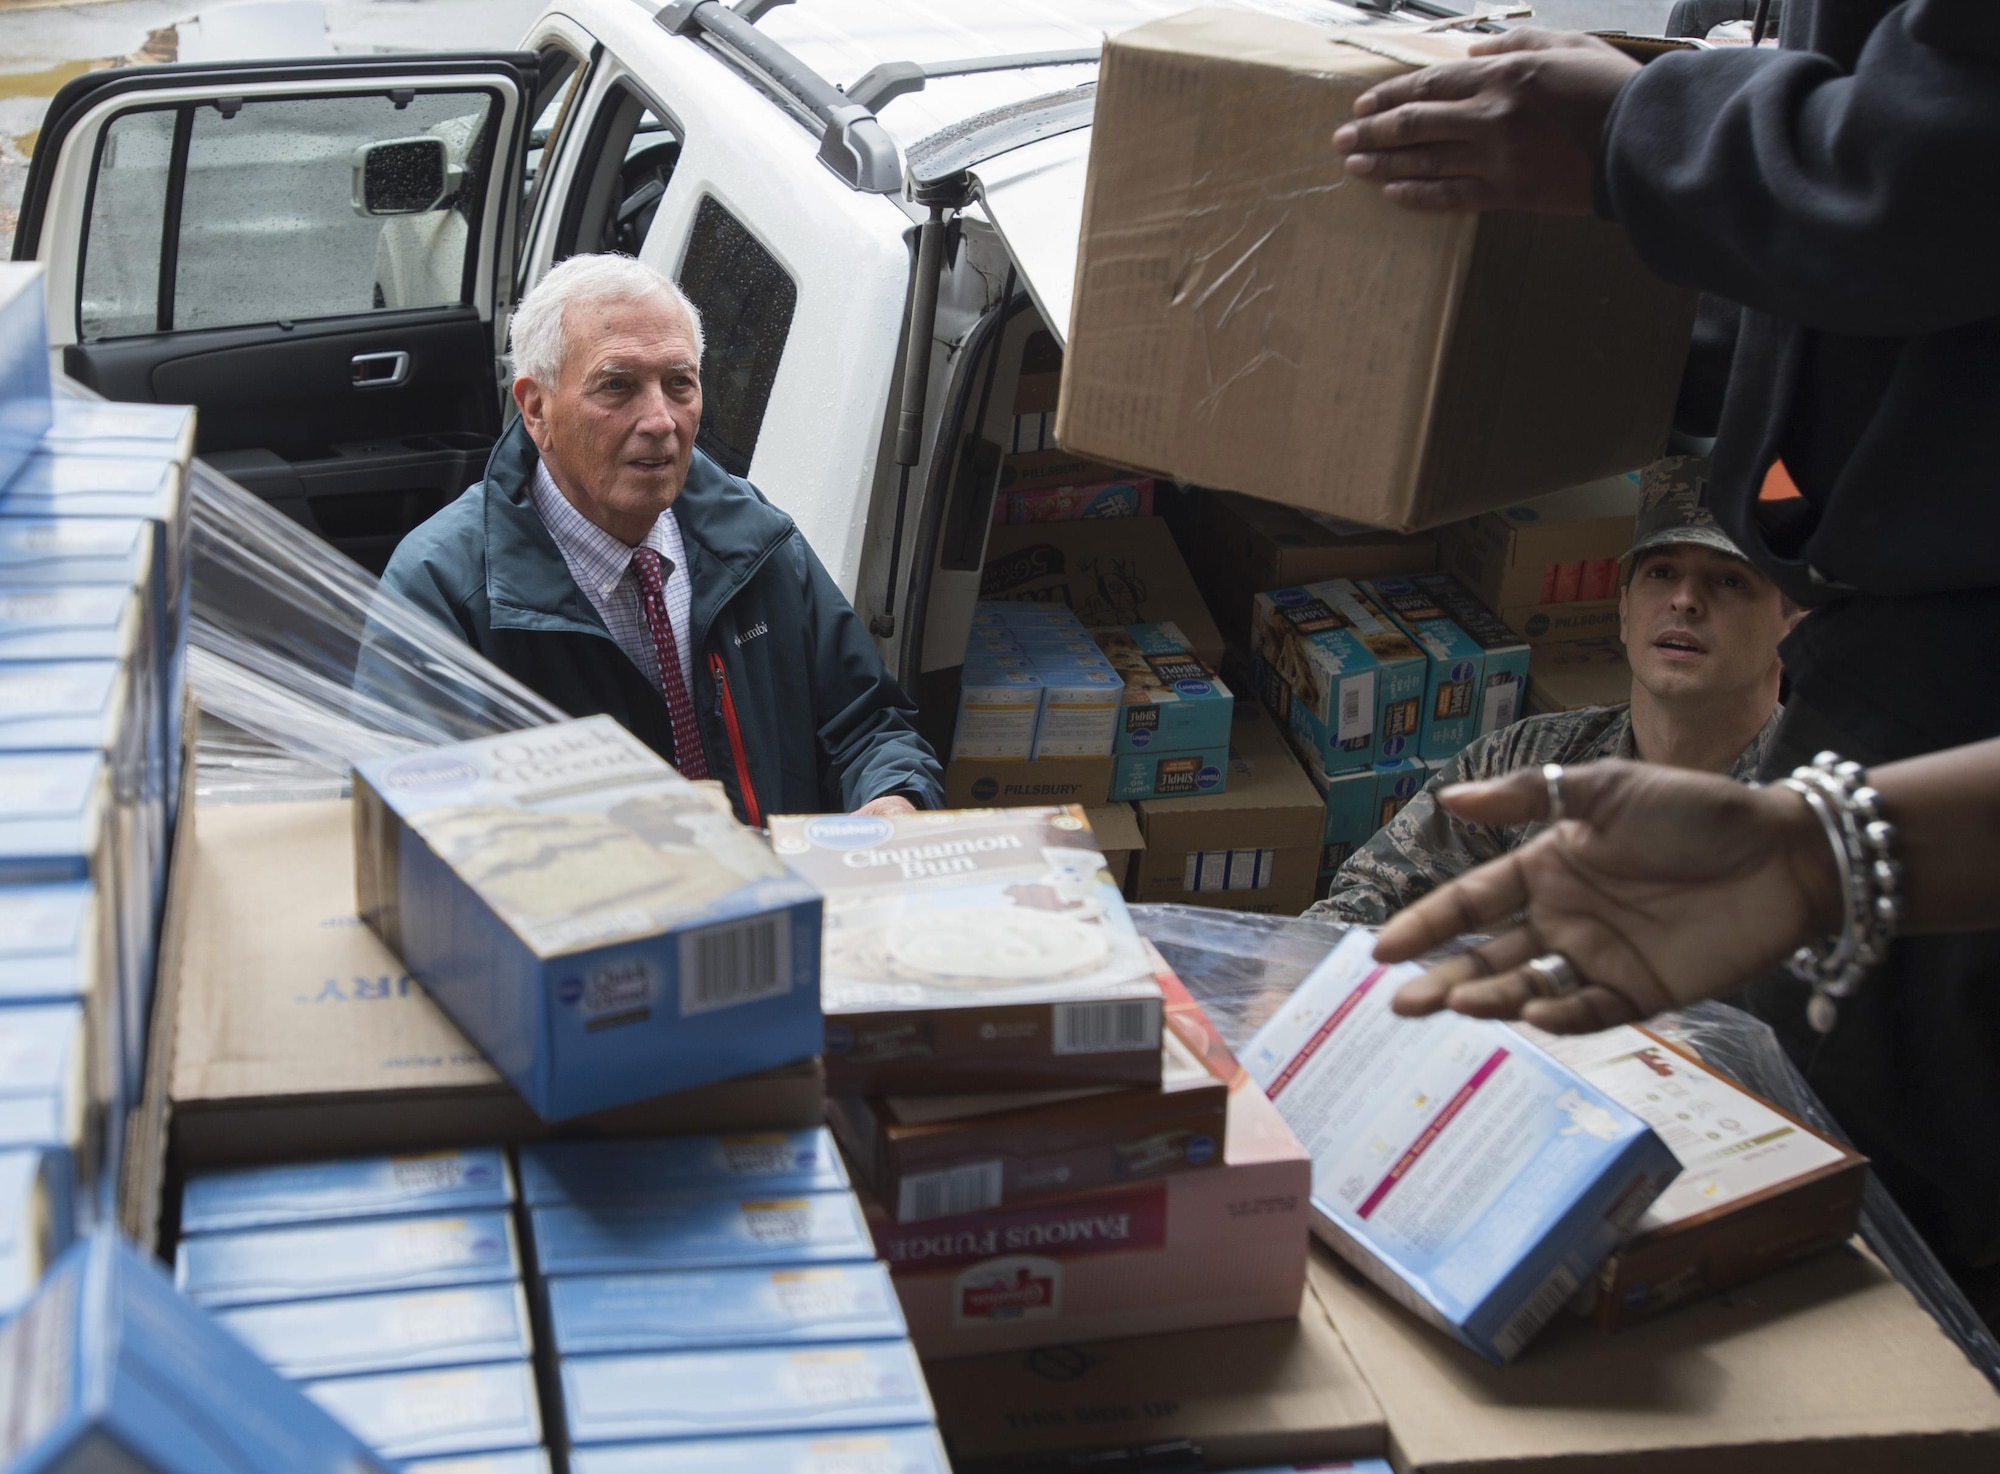 Robert Clagett, Feds Feeds Families volunteer and Capt. Carlos Cueto Diaz, Joint Base Andrews food bank liaisons, load donated goods into vehicle prior to distribution at JBA, Maryland, April 7, 2016. In the last year, JBA has contributed nearly 10,000 pounds of food as part of the Defense Commissary Agency’s established process for covering diversion of unsellable but edible food to local food banks.  (Photo by Senior Airman Nesha Humes/RELEASED)